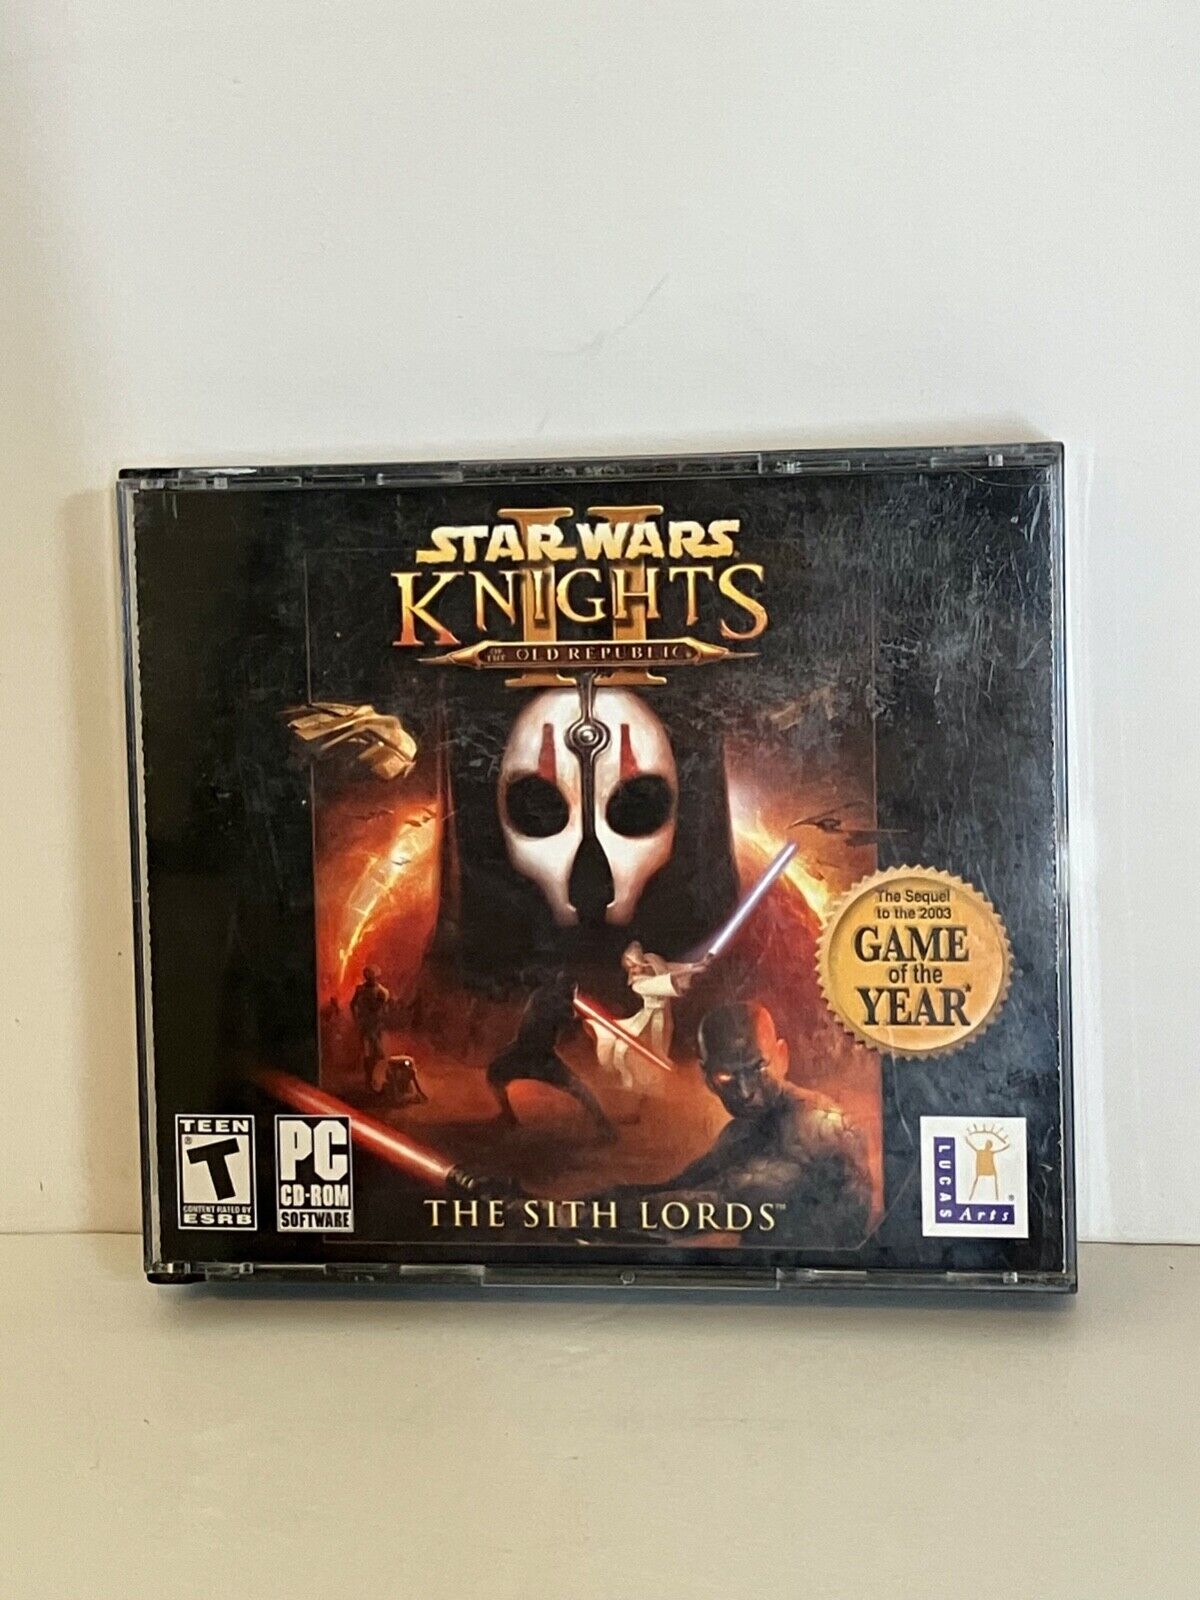 Star Wars Knights of the Old Republic II (PC, 2004) KOTOR 2 - Clean Discs!